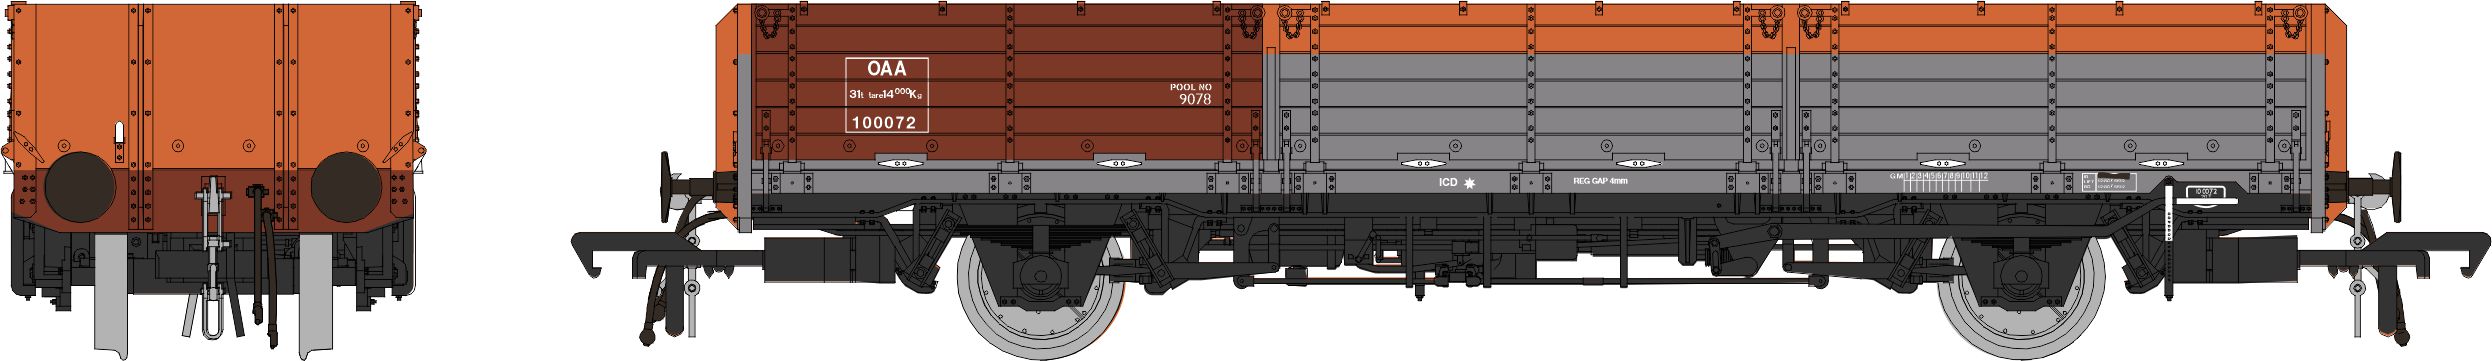 Rapido 915015 OAA Open Wagon Railfreight Red/Grey Two Red Plank Patched Finish  No.100072, OO Gauge